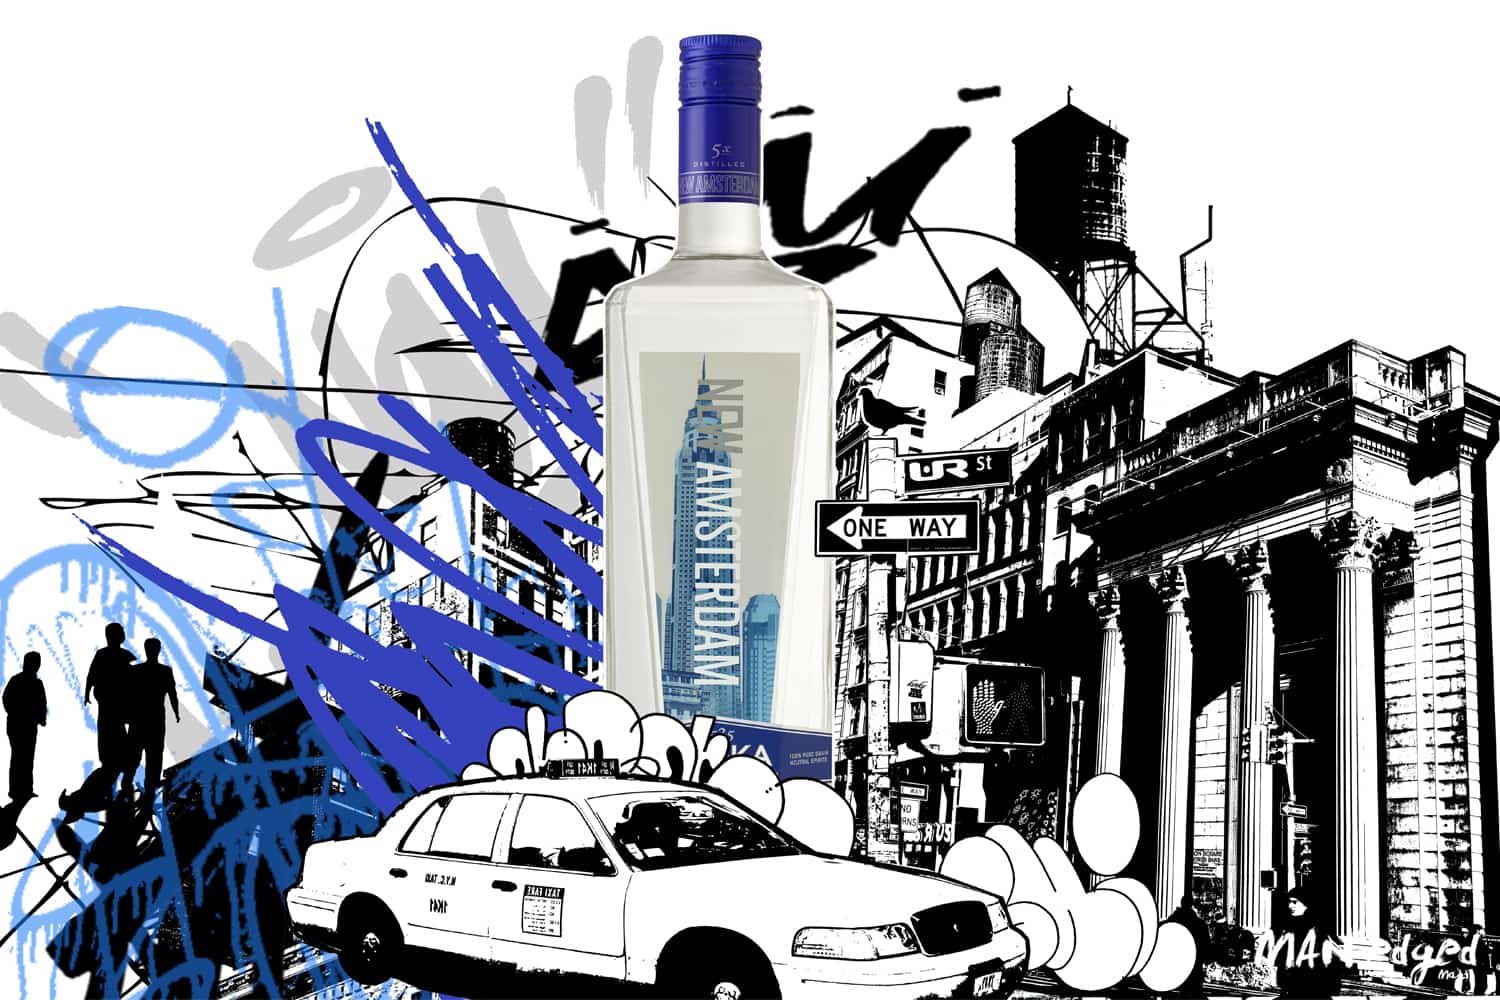 UR New York mural painting featuring New Amsterdam vodka for "It's your Town" tour